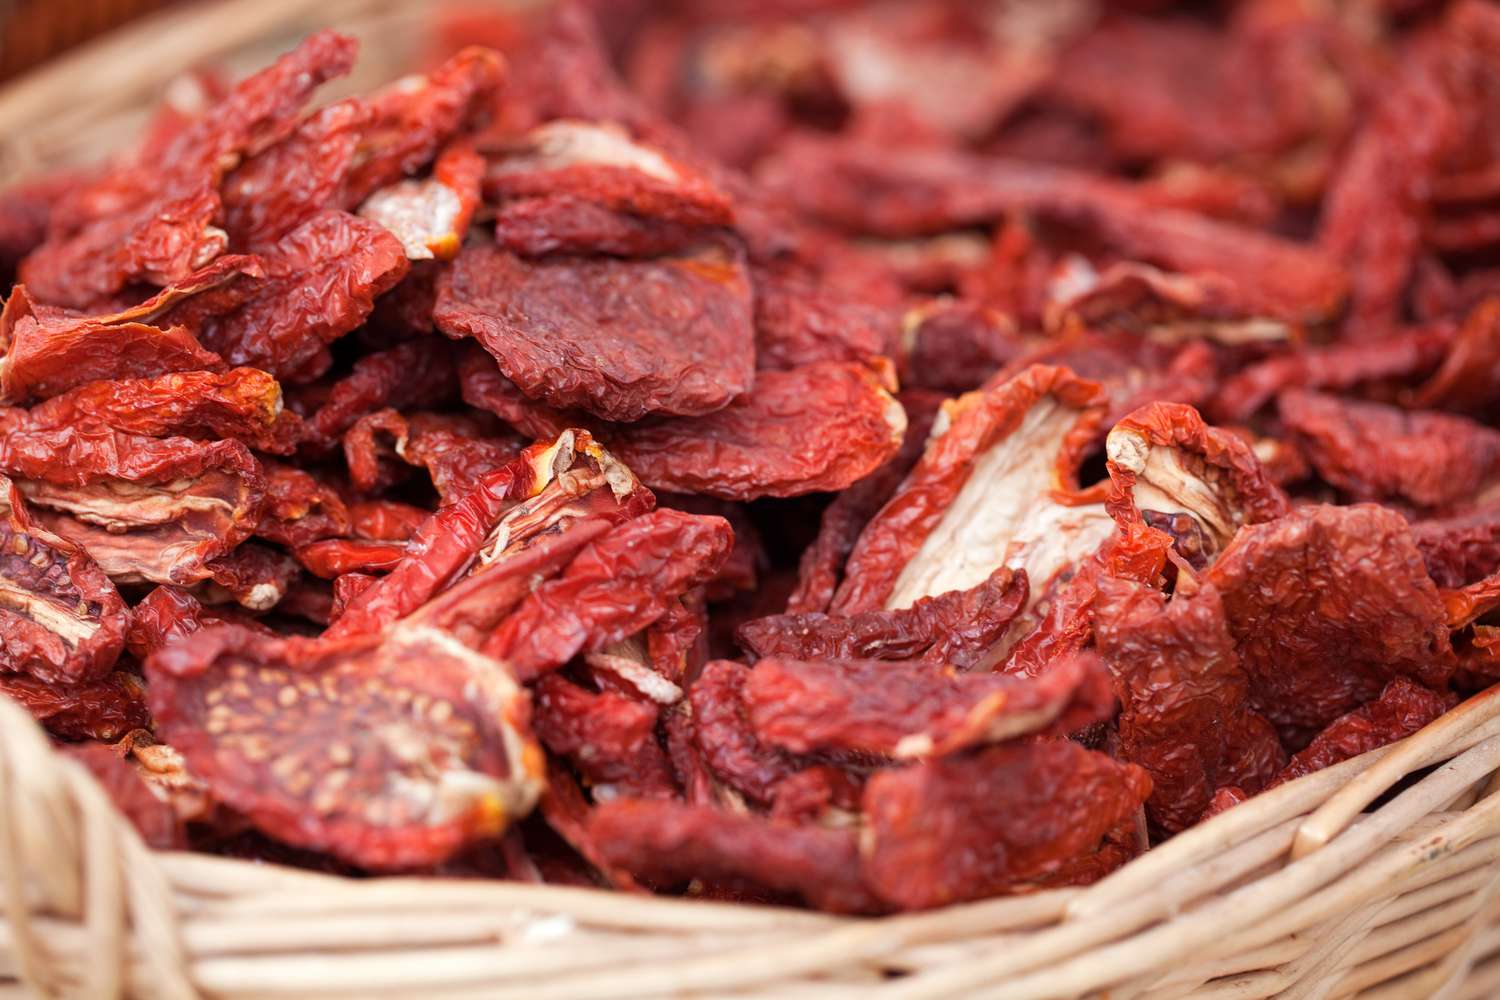 How To Store Sun-Dried Tomatoes In Oil